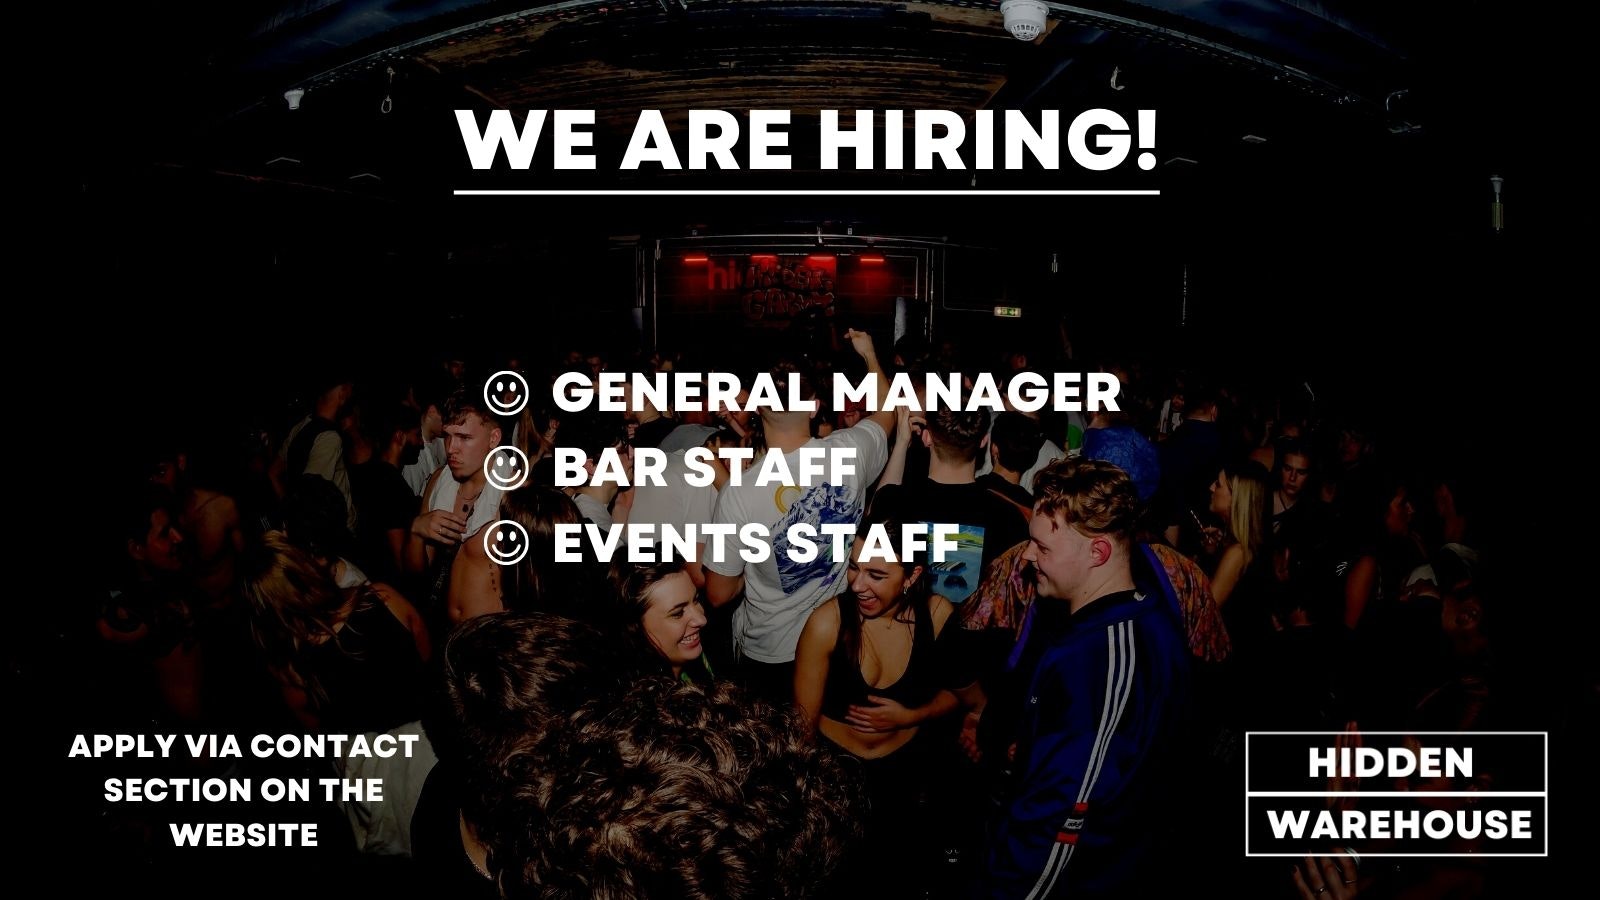 WE ARE HIRING !